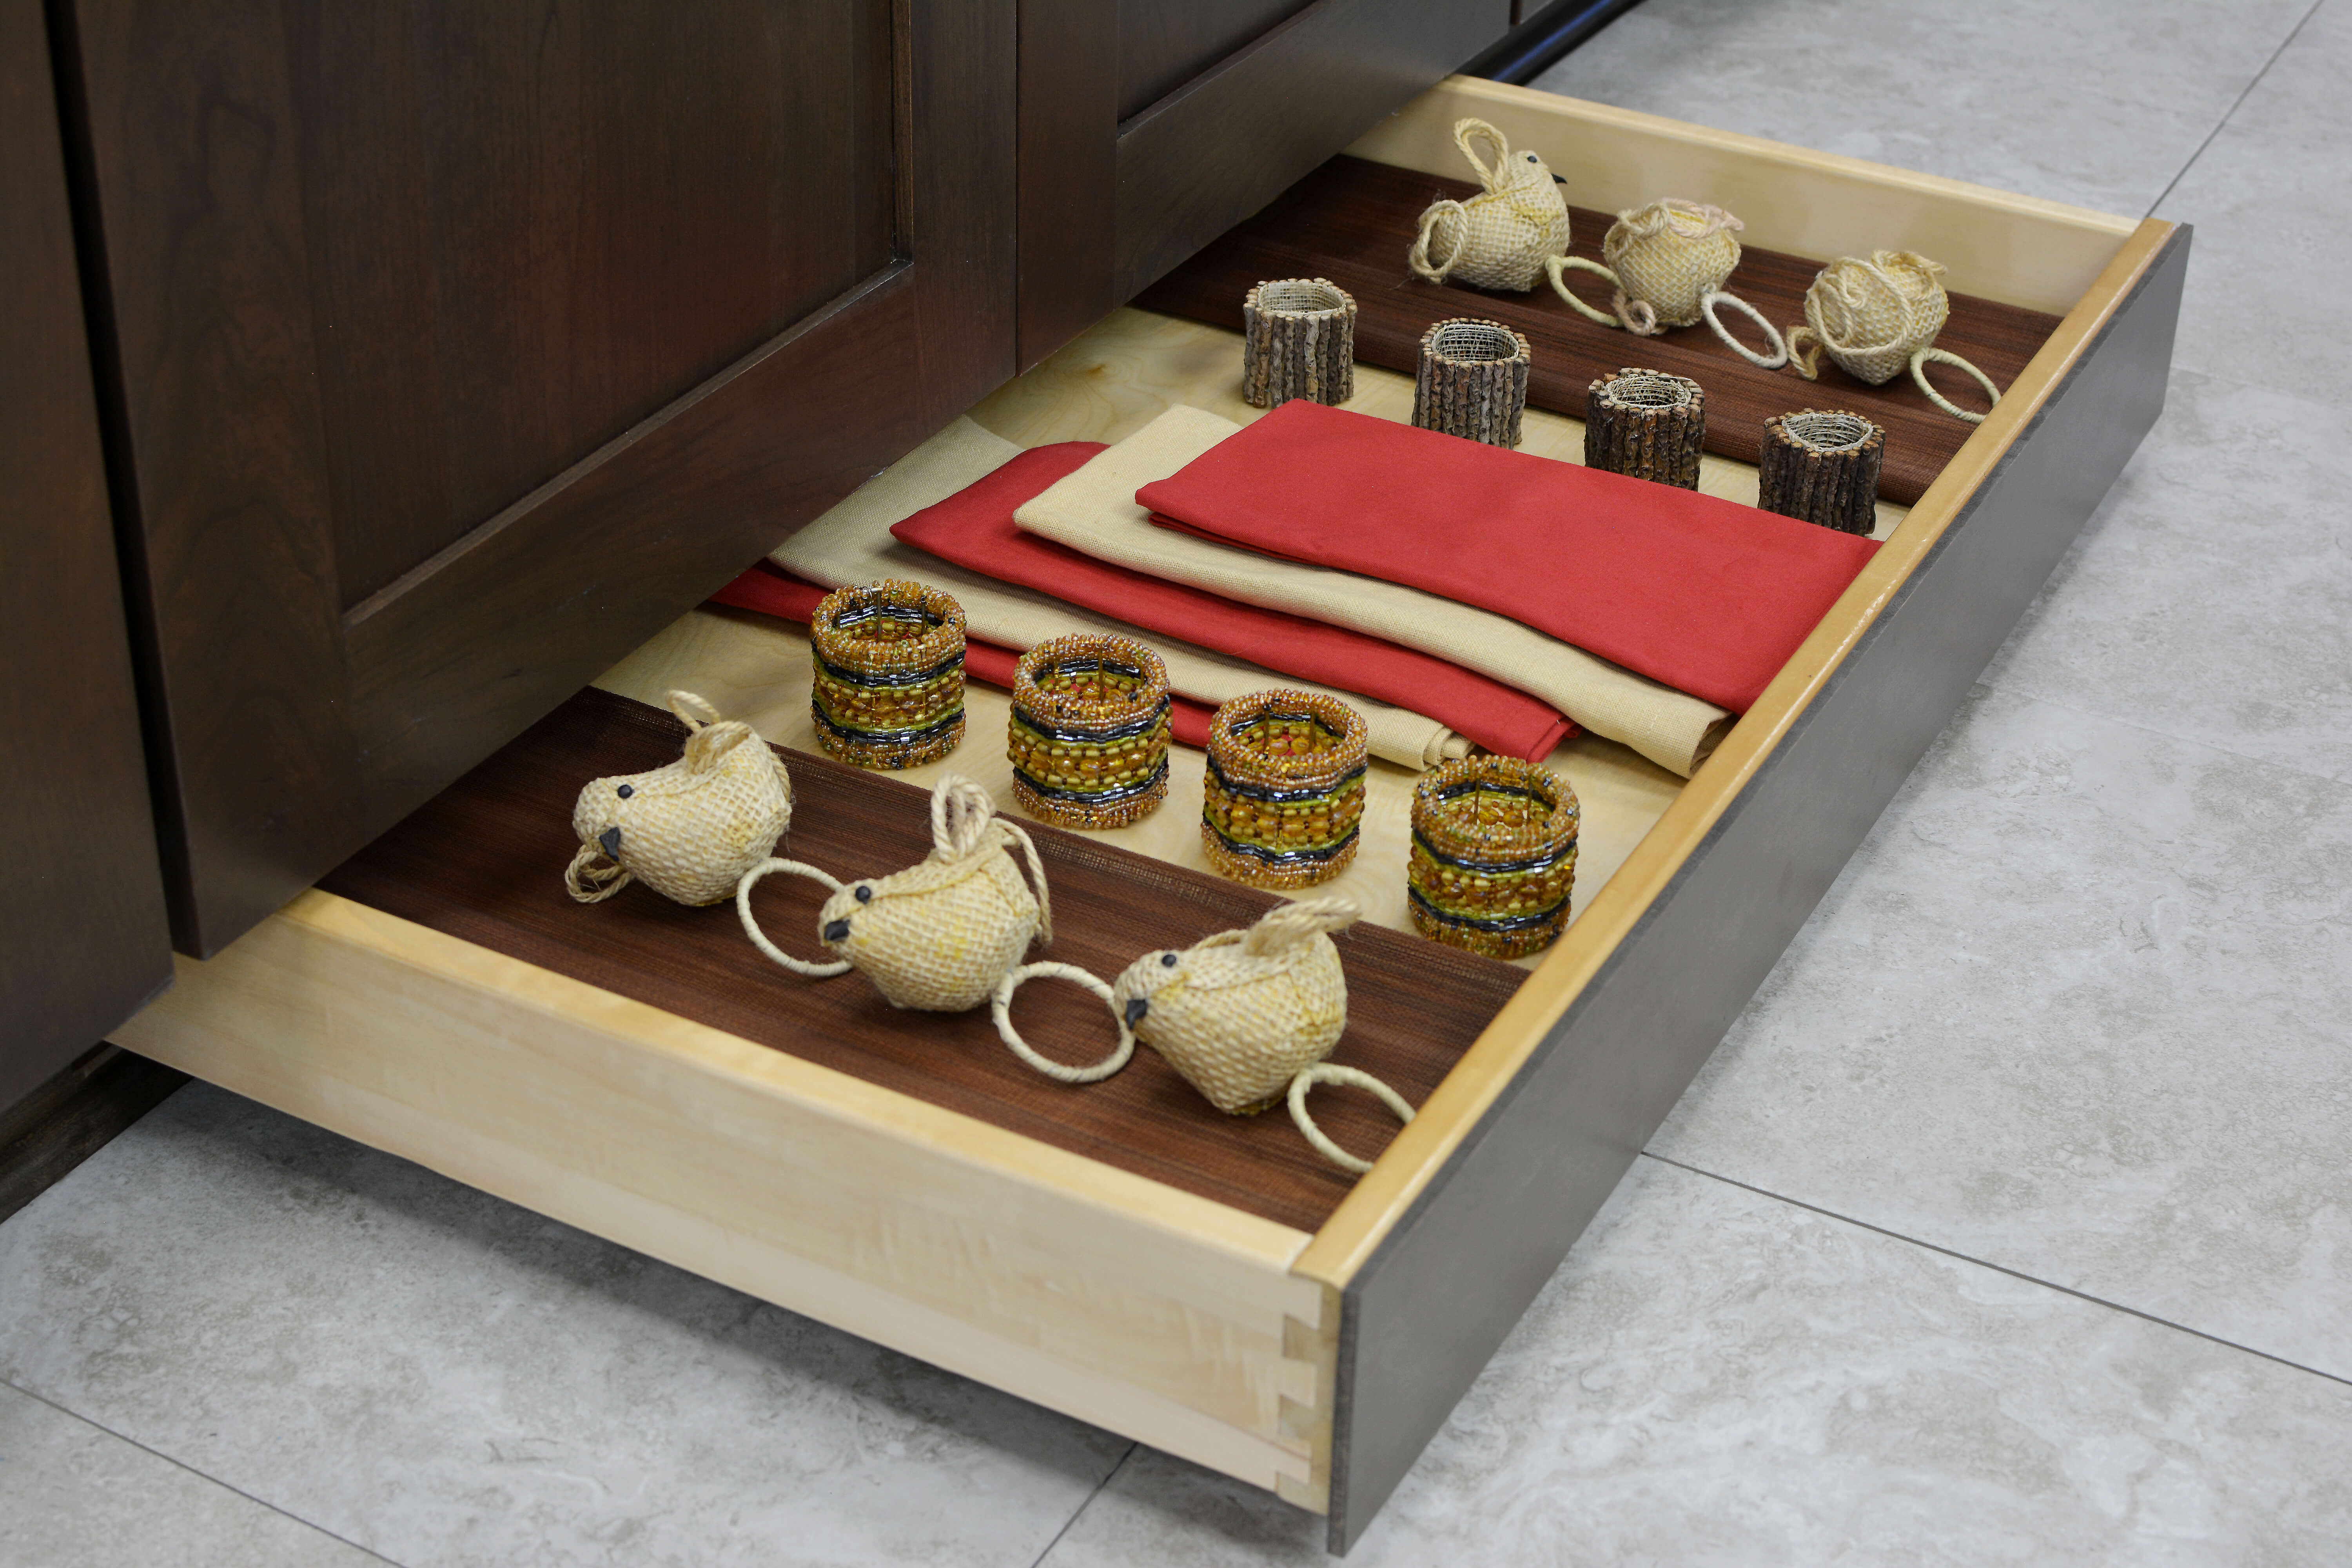 Miscellaneous items can find a home in a Dura Supreme Toe-Kick drawer hidden at the foot of your cabinets. It is the perfect place for stashing your seasonal table dressings, linens, candles, and more!